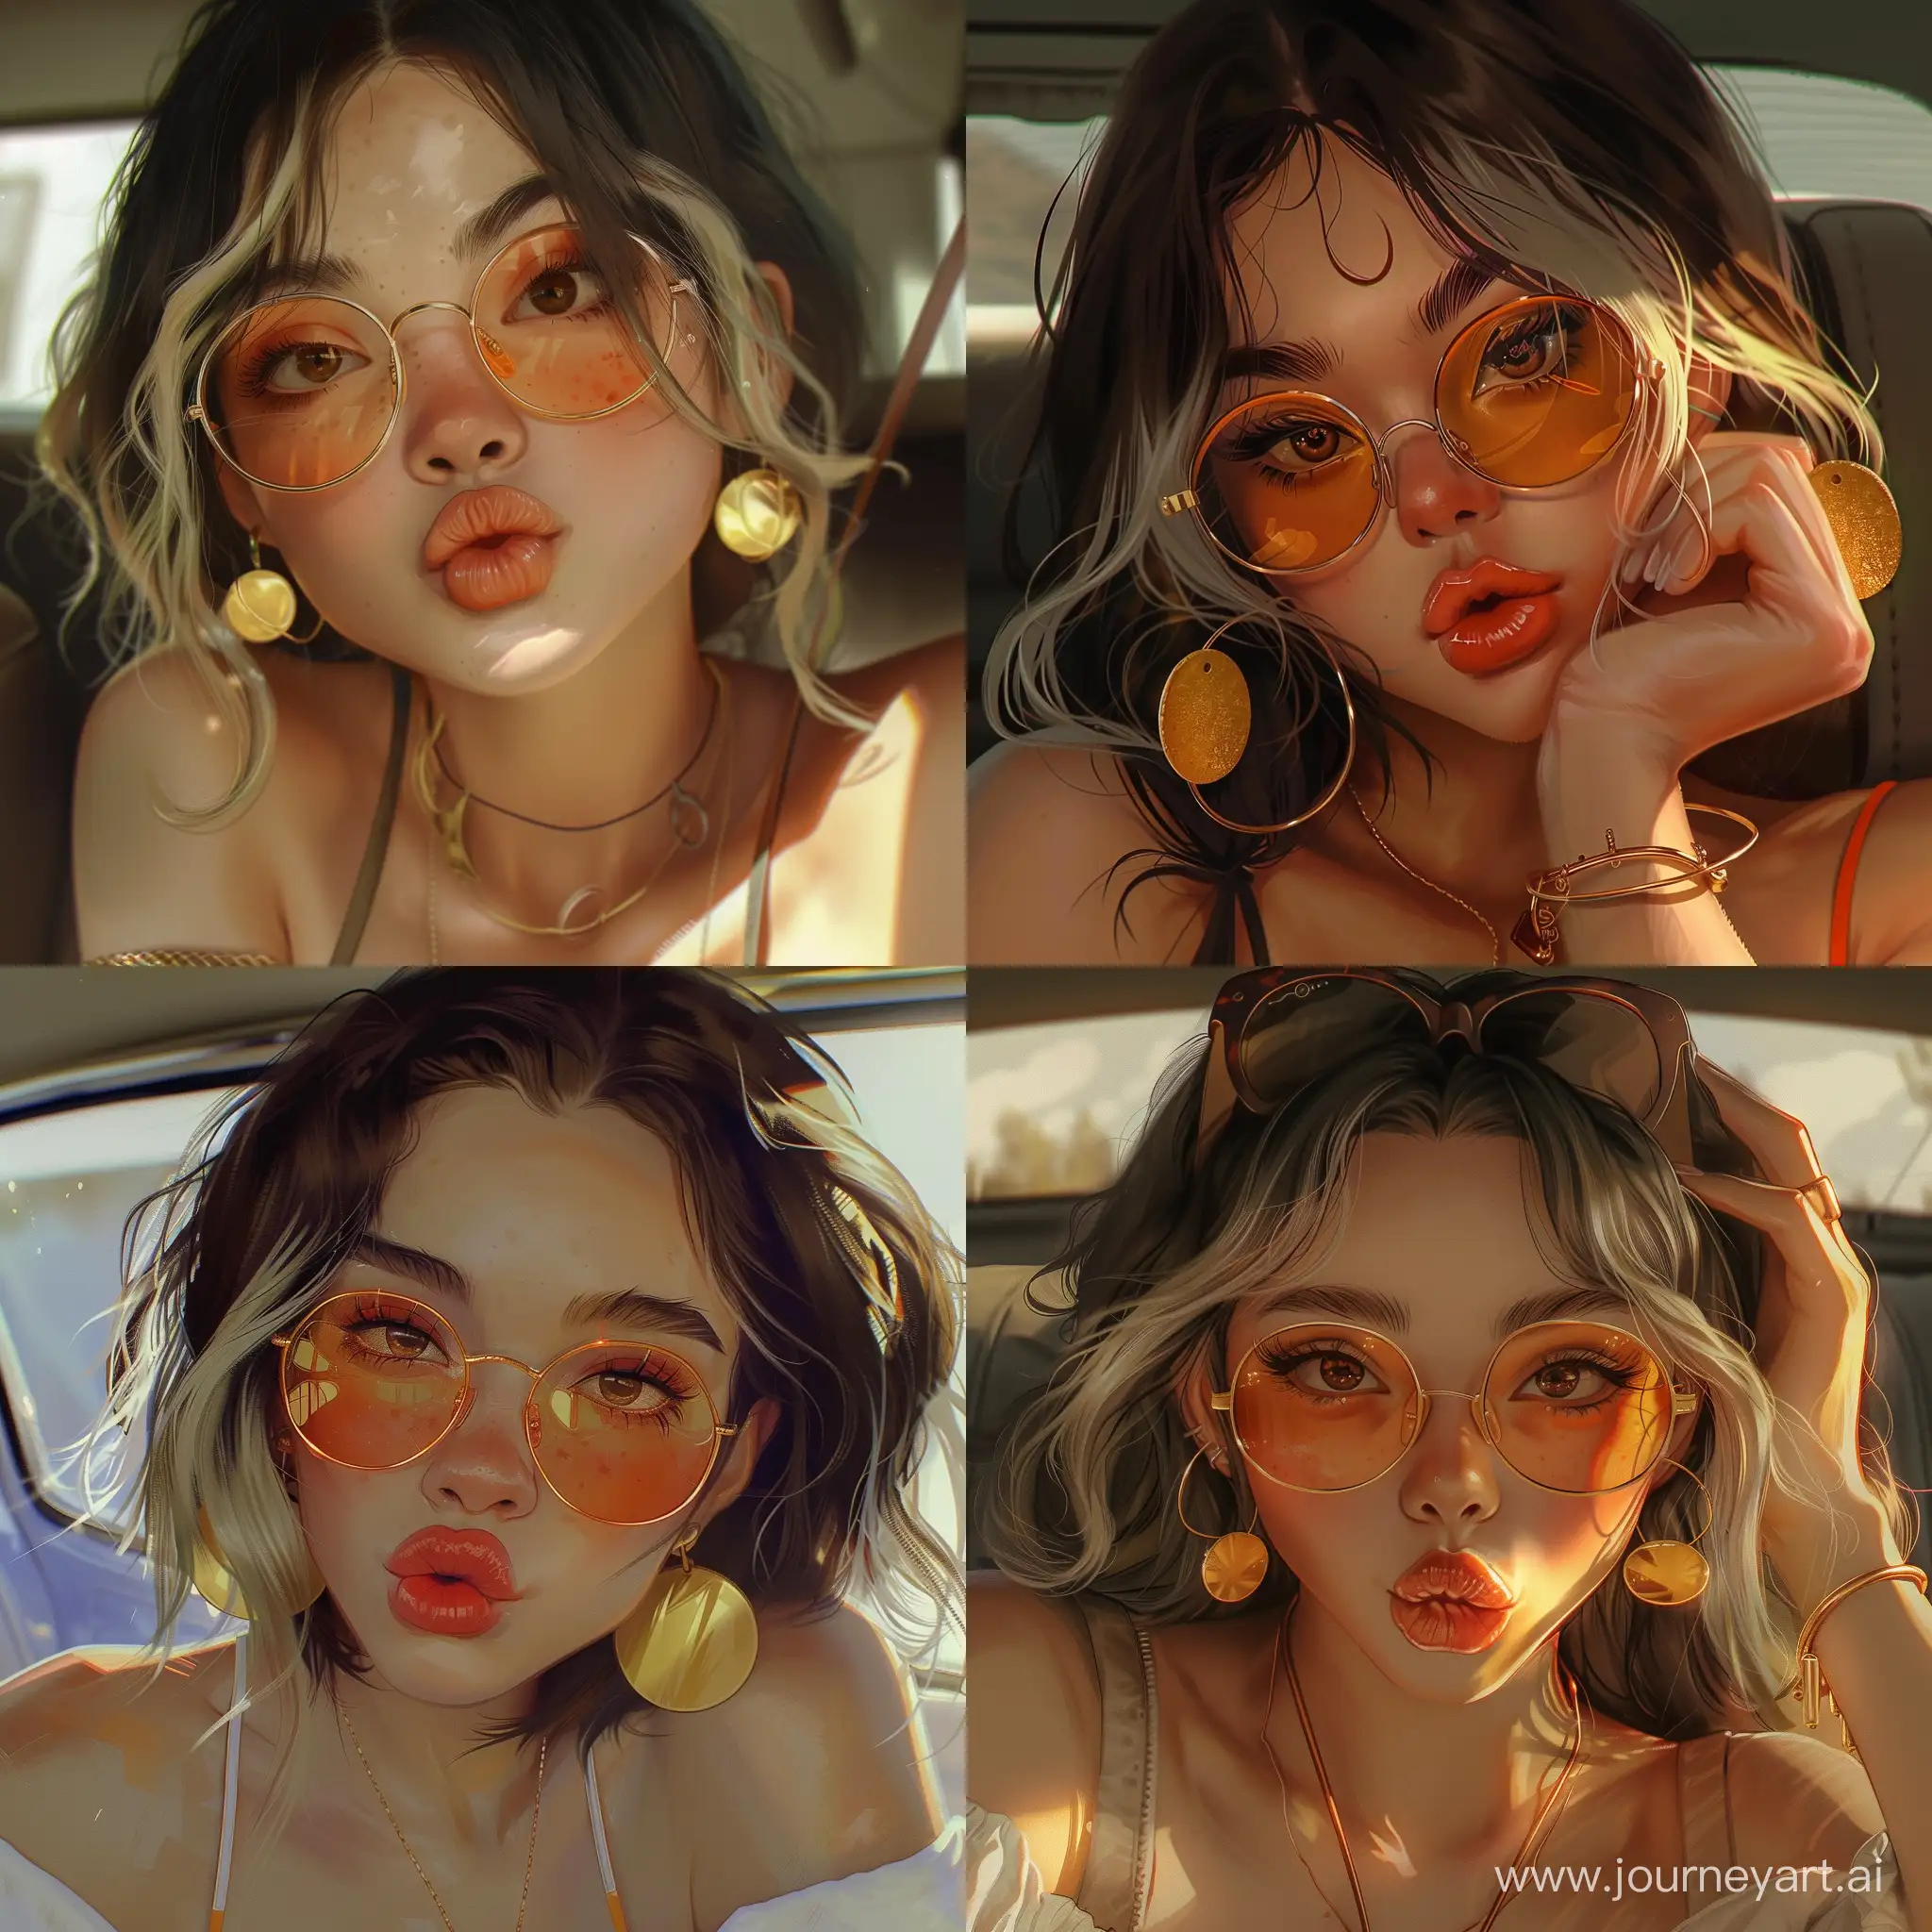 Girl-with-Highlighted-Hair-Sitting-in-Car-Orange-Glasses-and-Round-Earrings